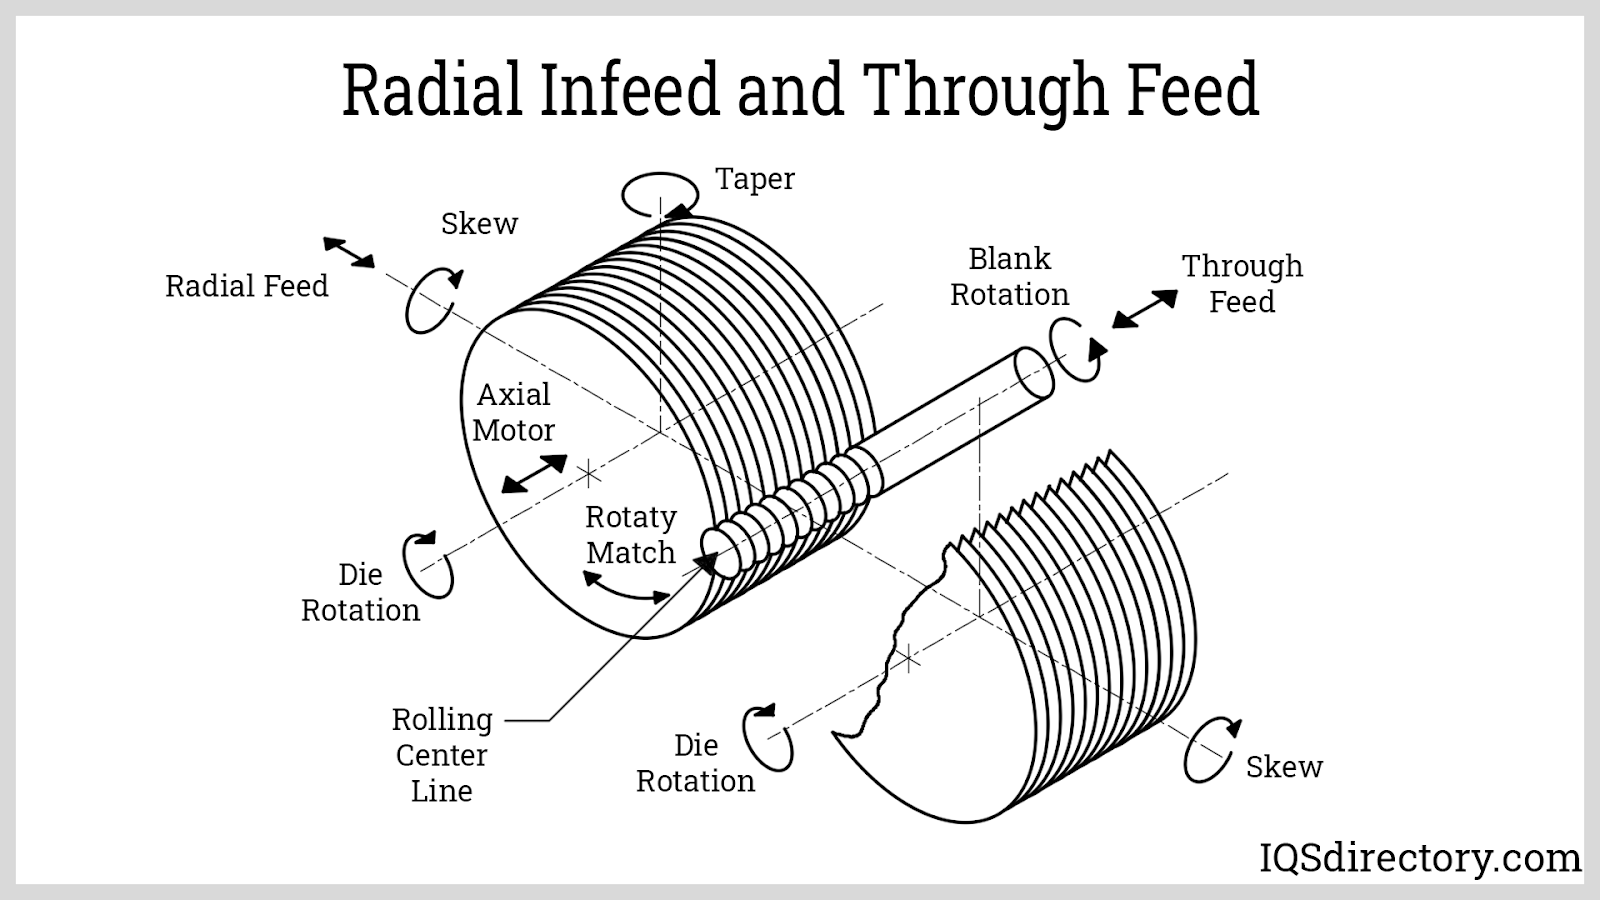 Radial Infeed and Through Feed